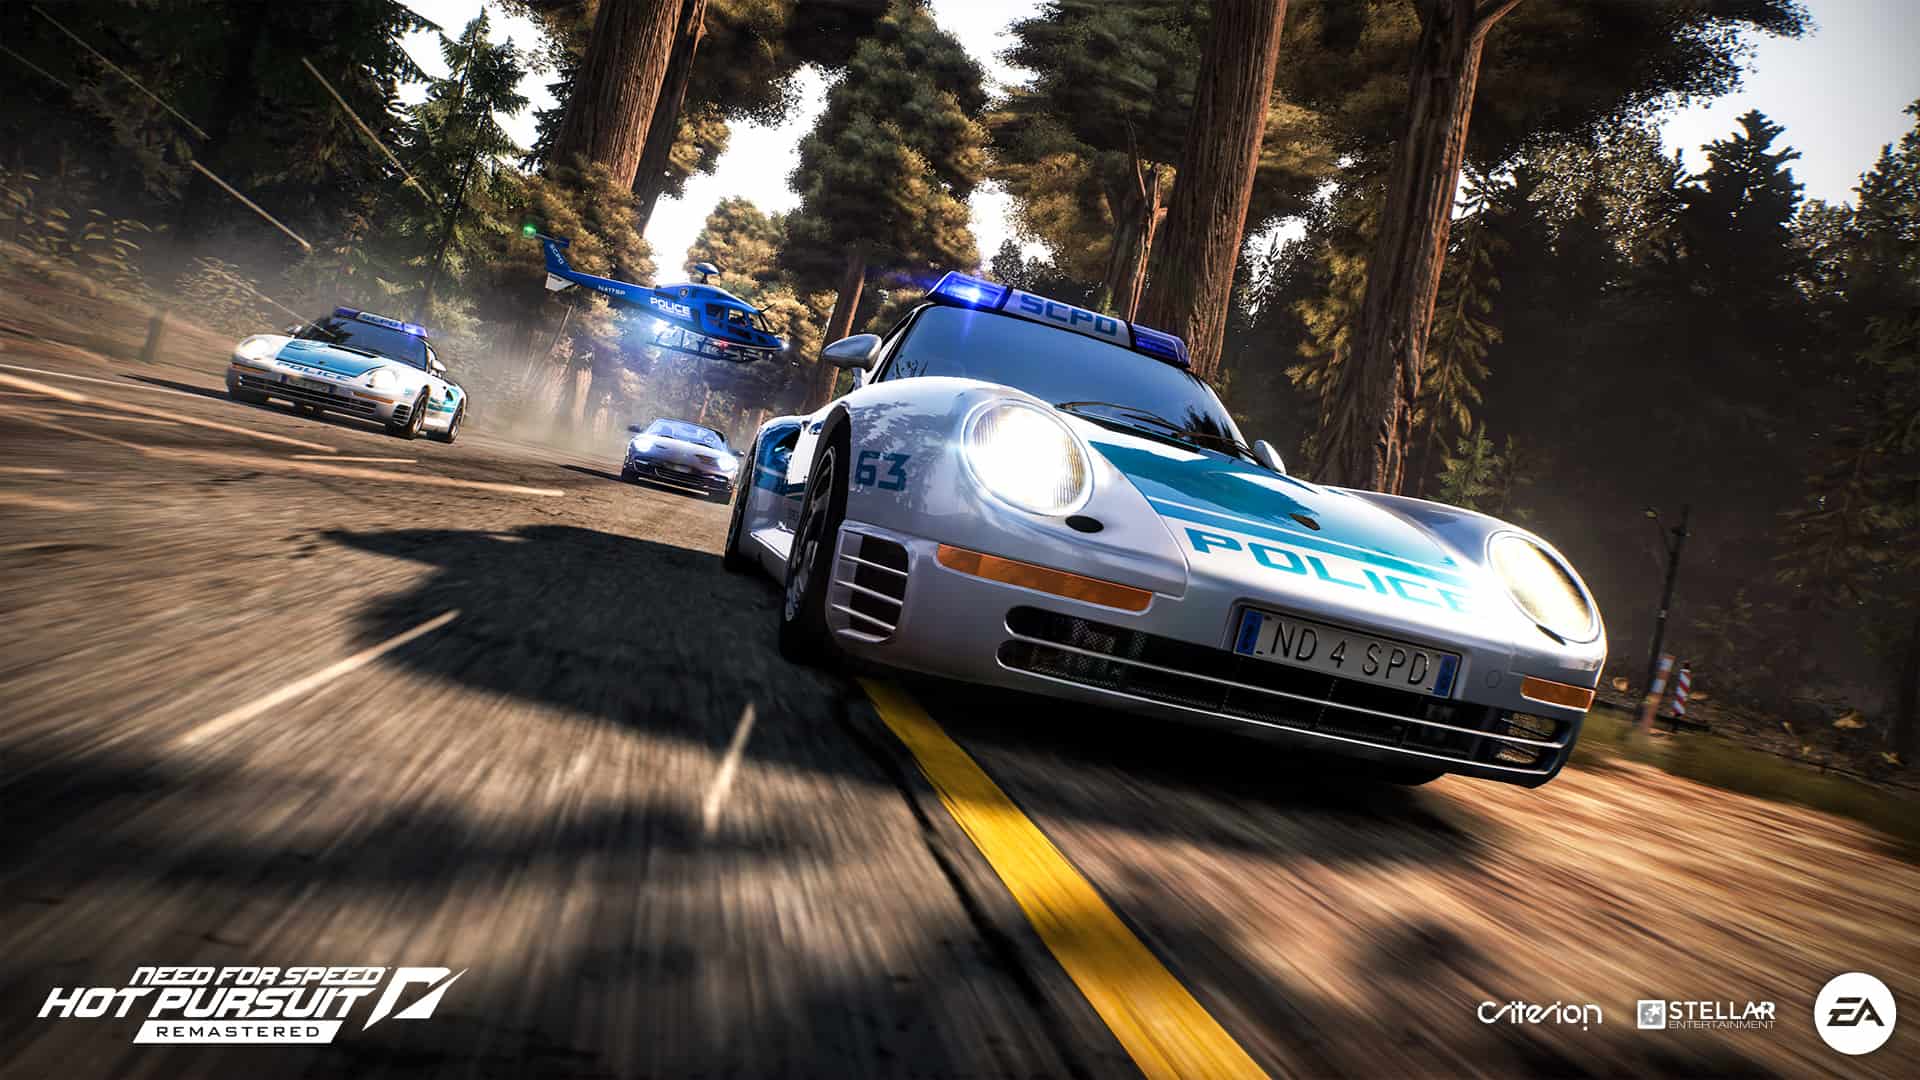 Need for Speed: Hot Pursuit Remastered is now part of EA Play